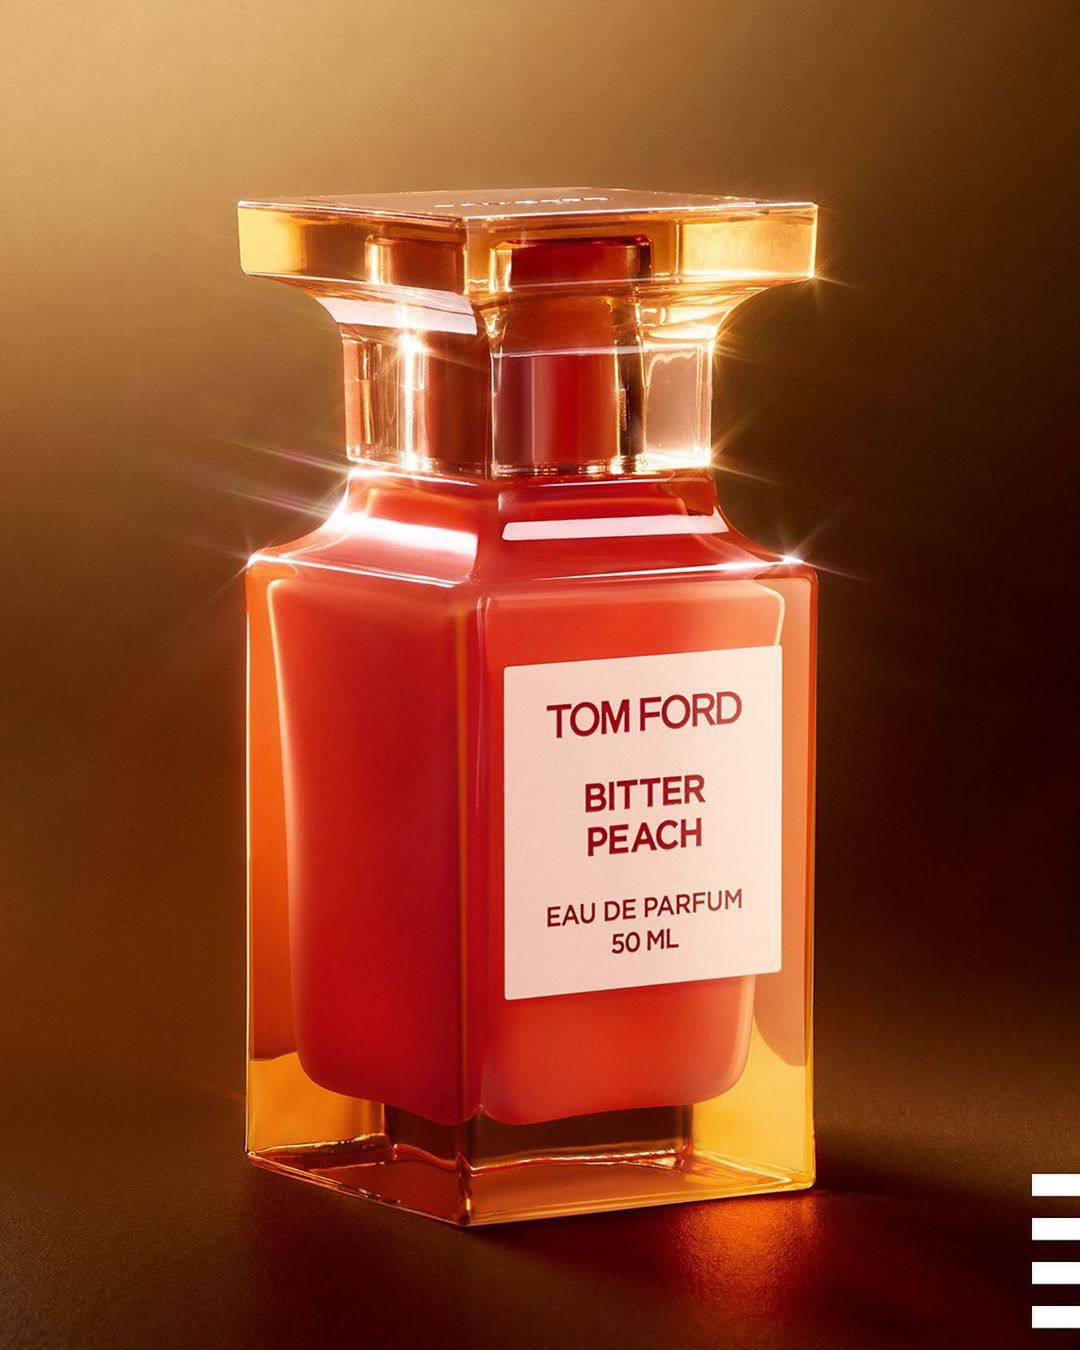 Sephora - Shiny new fragrance to fall in love with? 😍@tomfordbeauty’s new Bitter Peach is a fruity-floral delight you’ll want to bite right into. Leave a 🍑 if you’re adding it to your basket.